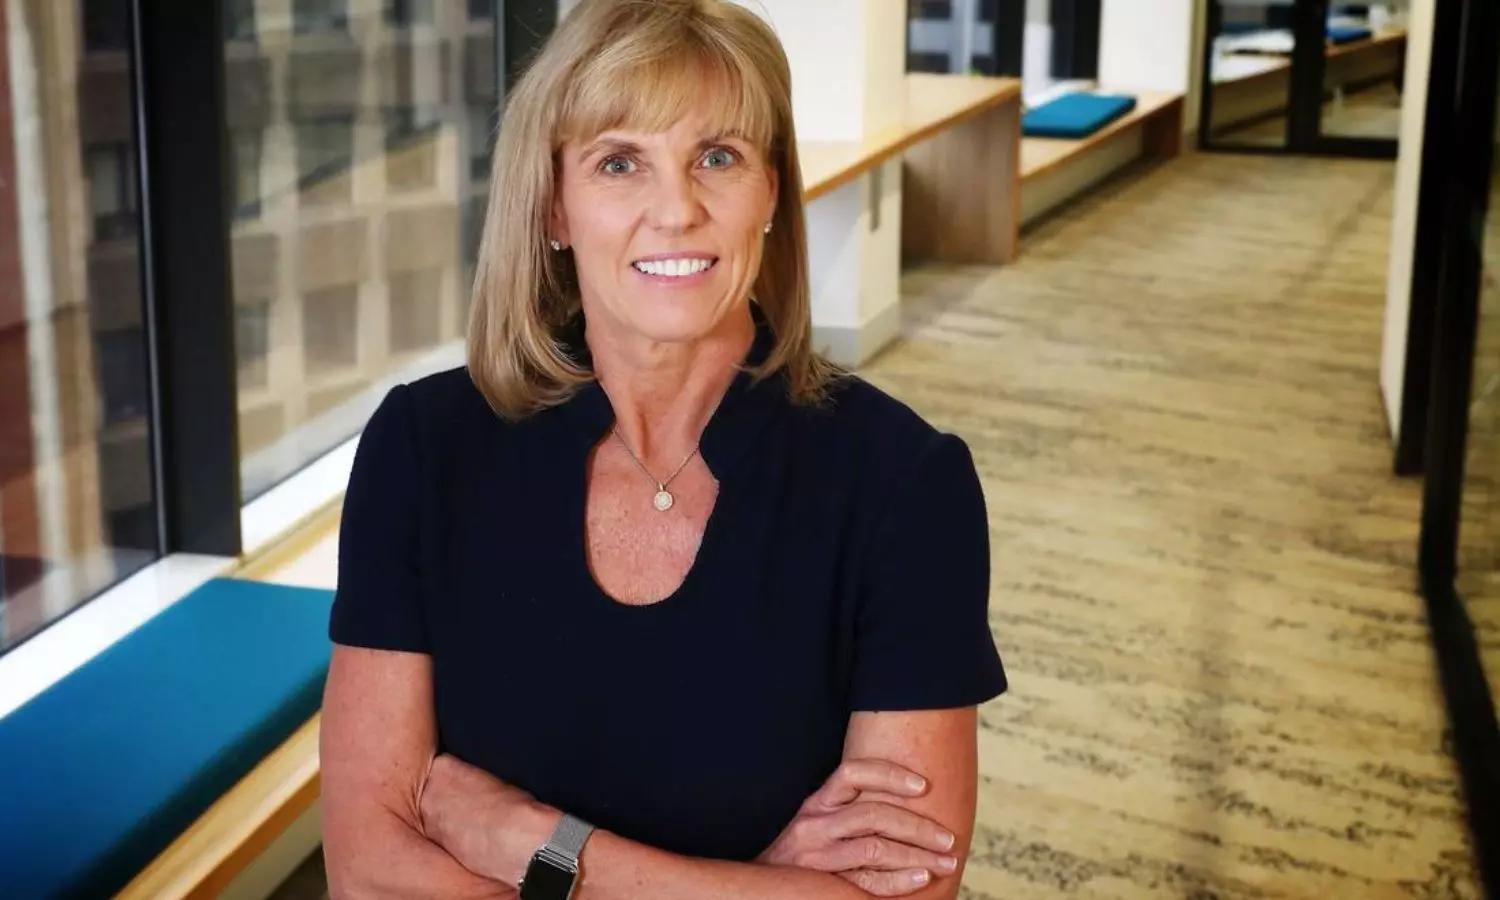 The appointment of Cindy Hook as chief executive of Brisbane 2032 shortly after leaving TOP sponsor Deloitte is set to raise issues of conflict of interests ©Deloitte